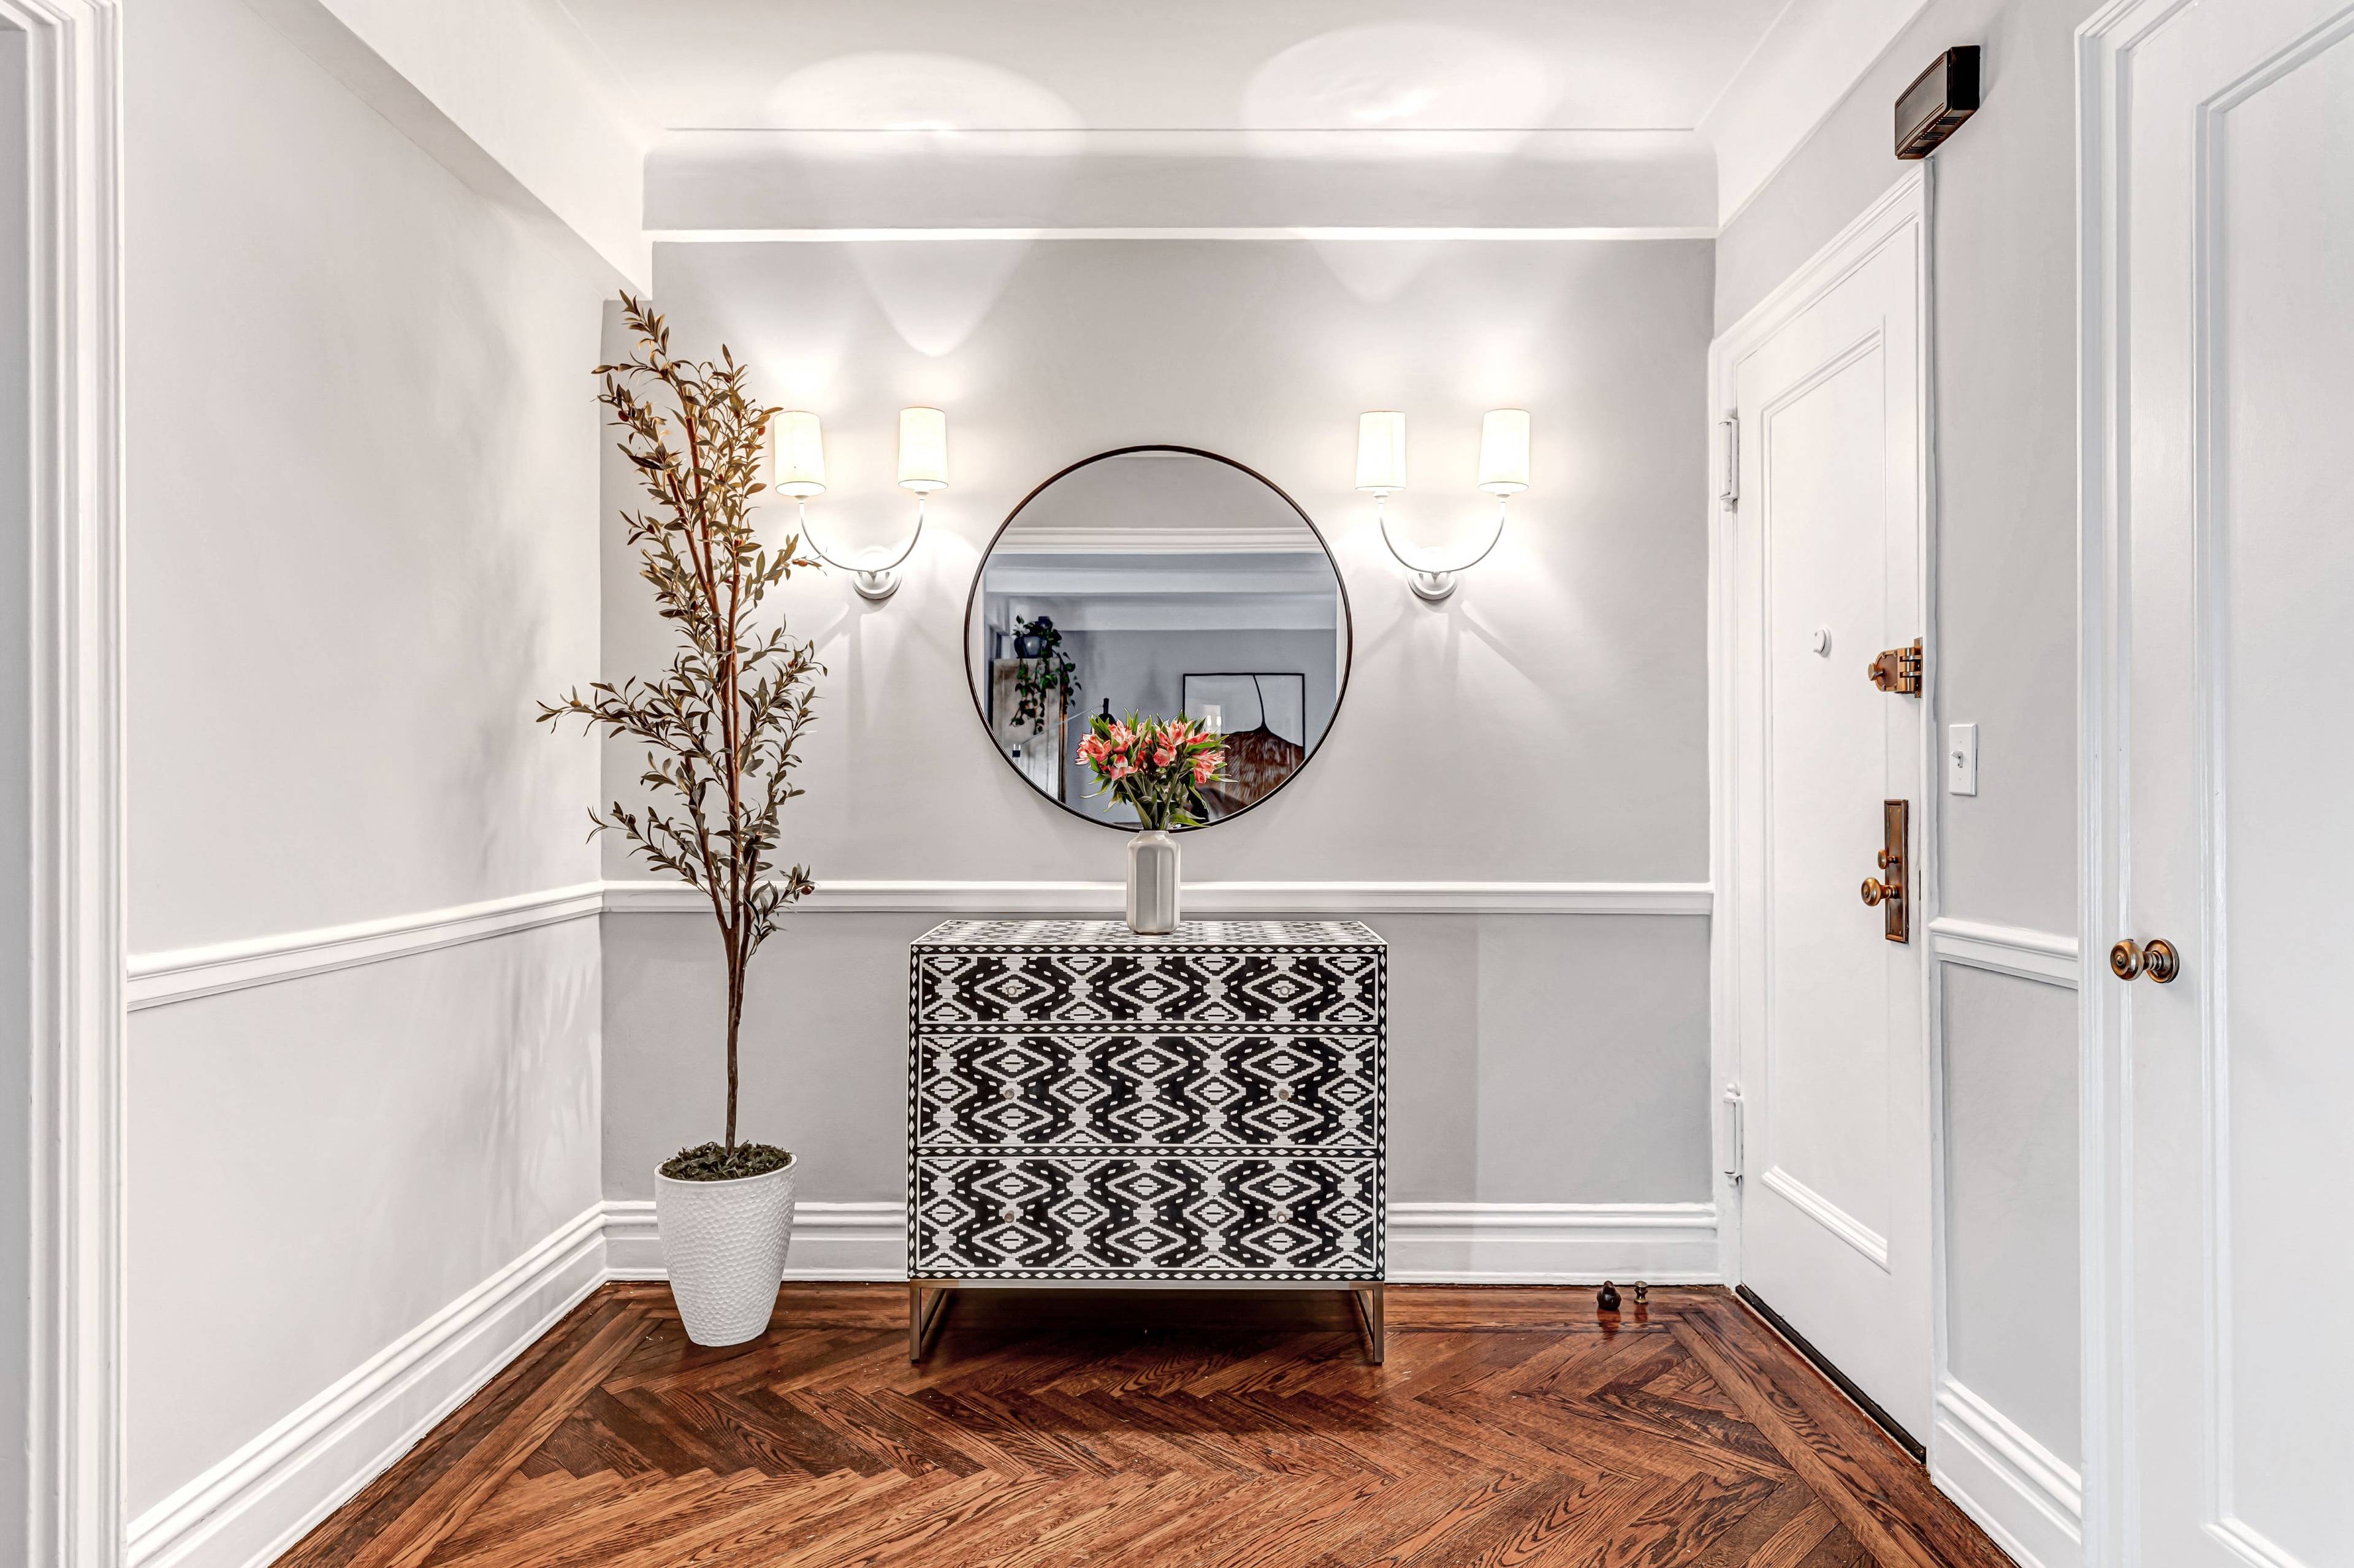 Move right into this pristine two bedroom, one and one half bathroom residence where a stylish renovation elevates classic prewar details to cultivate an atmosphere of timeless sophistication.